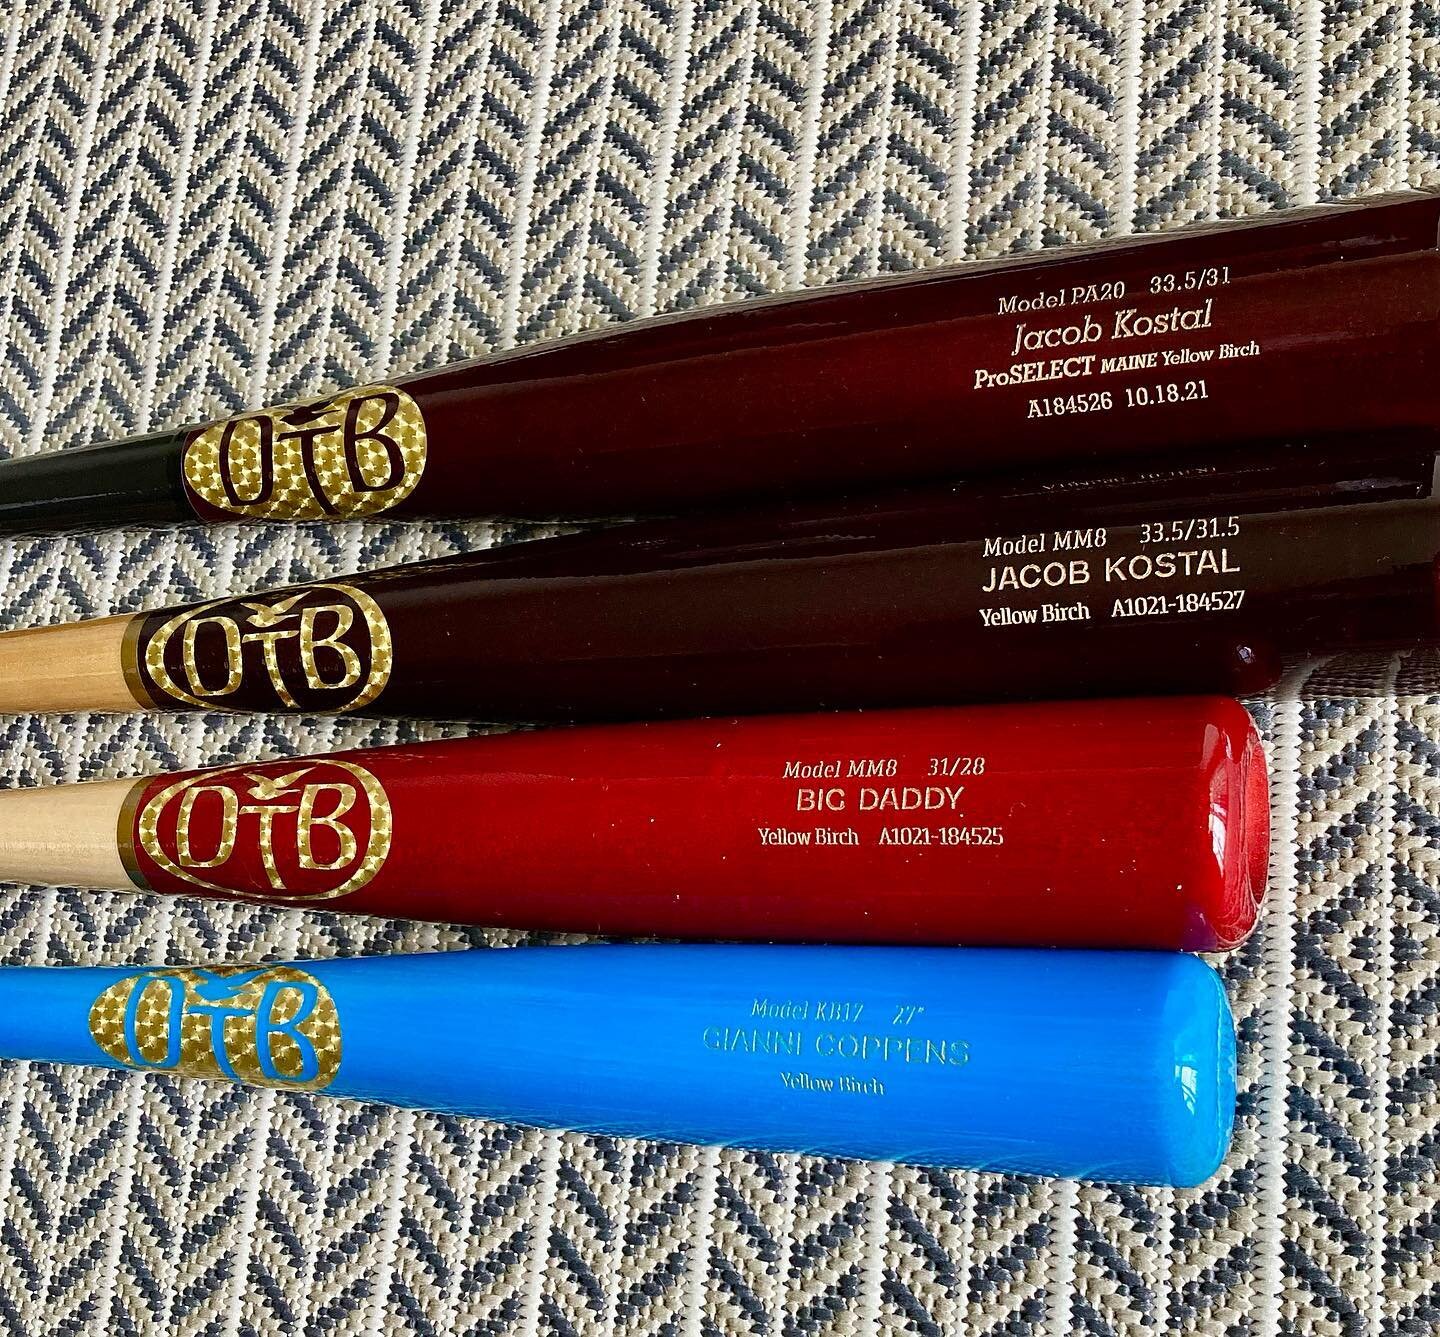 It&rsquo;s Fall/Winter Wood Break!!! Today is a good day for some of our hitters who invested in themselves and #hardestwoodinthegame @dovetailbatbaseball 🕊. Just 👀at these beautiful custom cuts we offer. Top to bottom: We have Pete Alonso PA20 33 